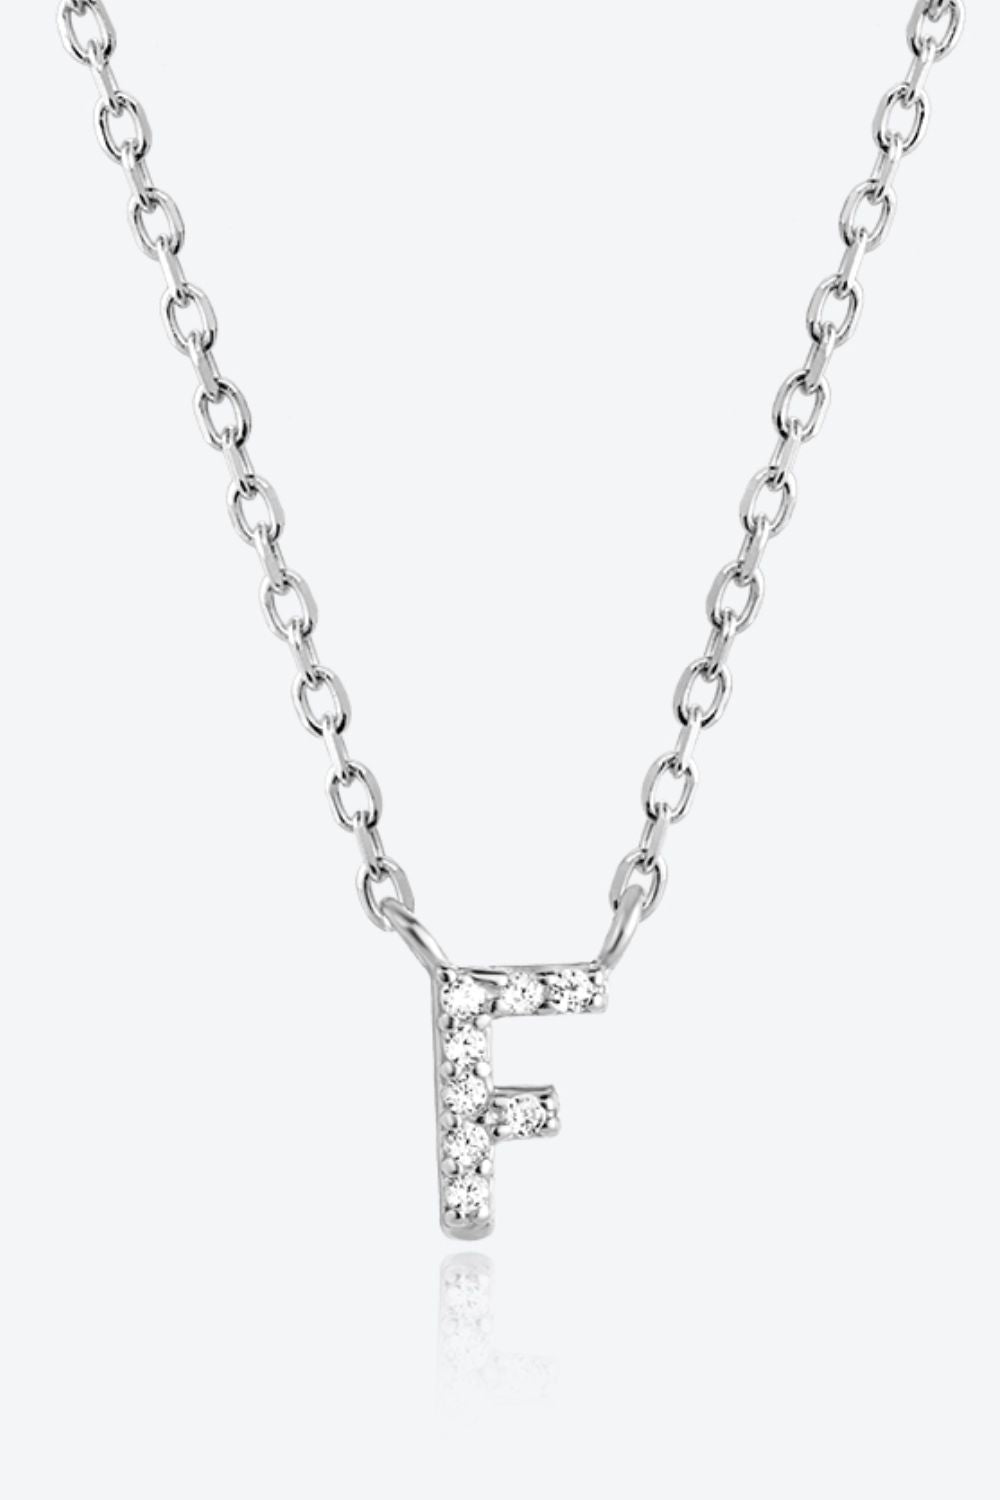 A To F Zircon 925 Sterling Silver Initial Necklace